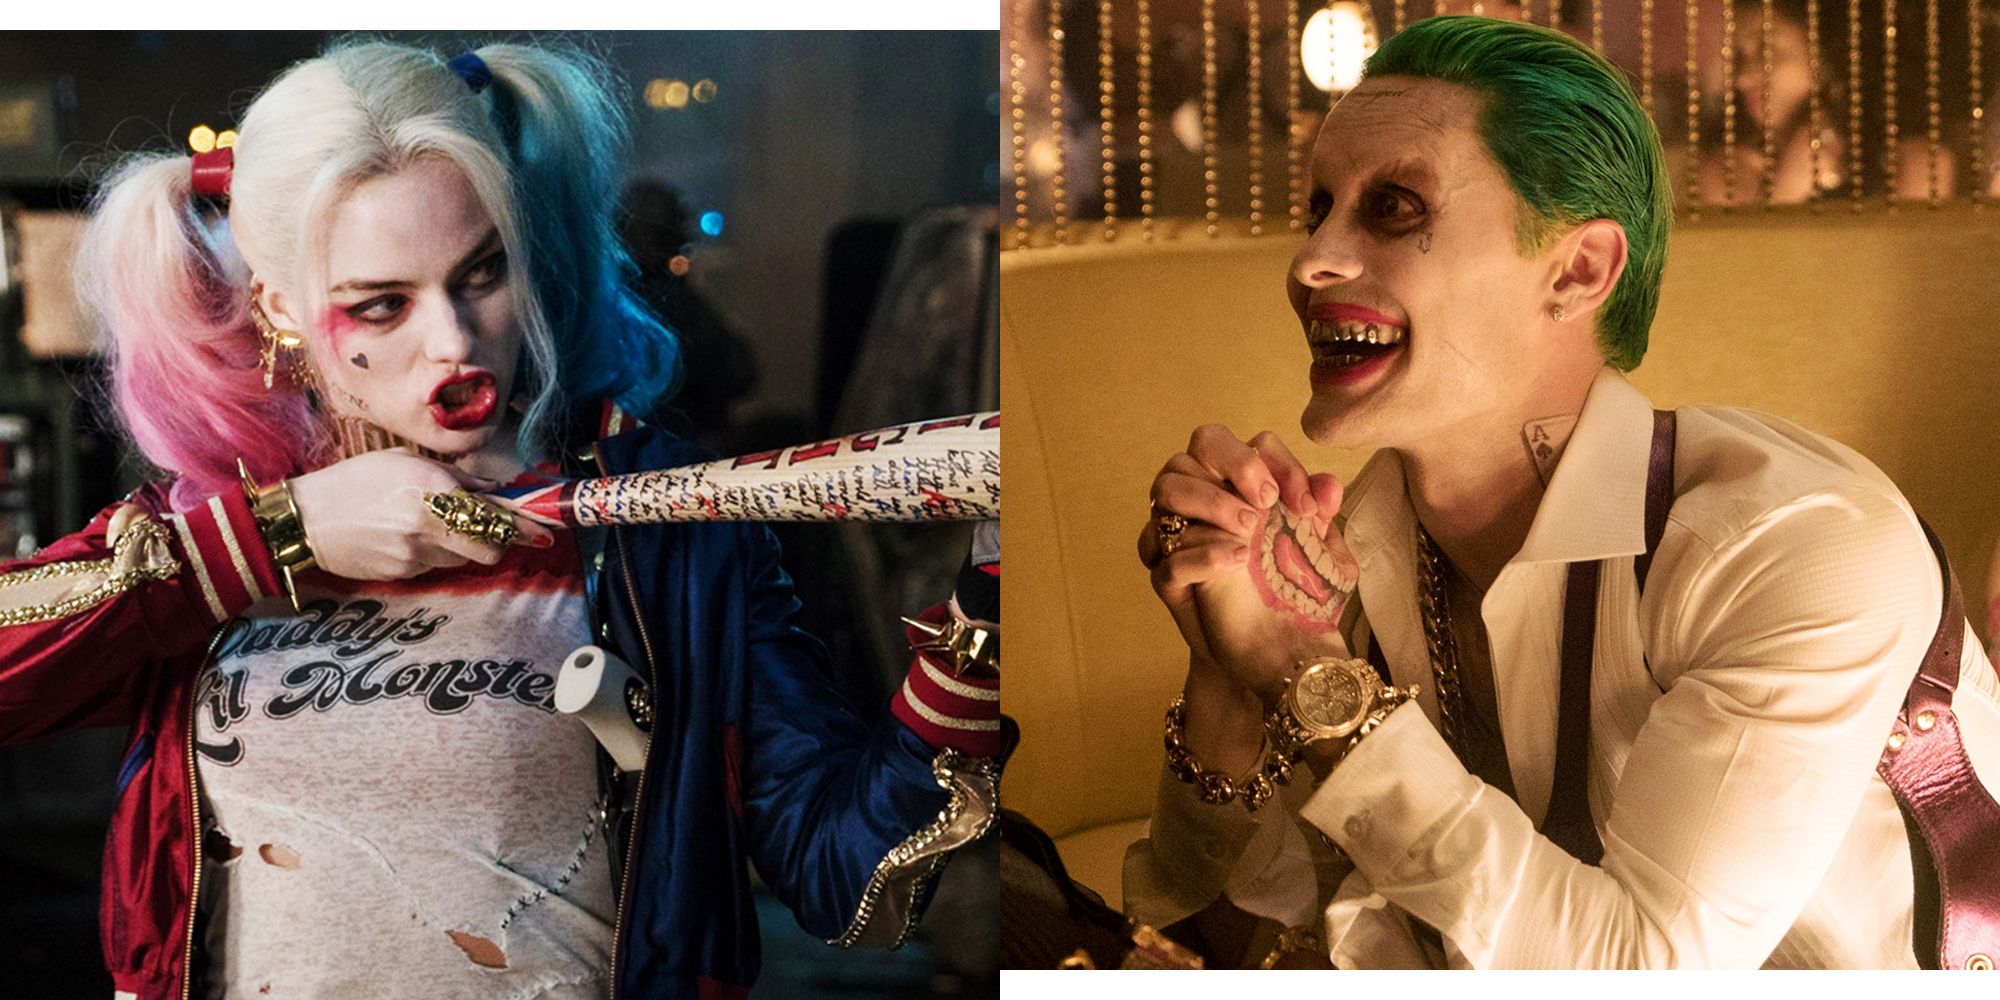 brian ybarra recommends Pictures Of Harley Quinn And Joker